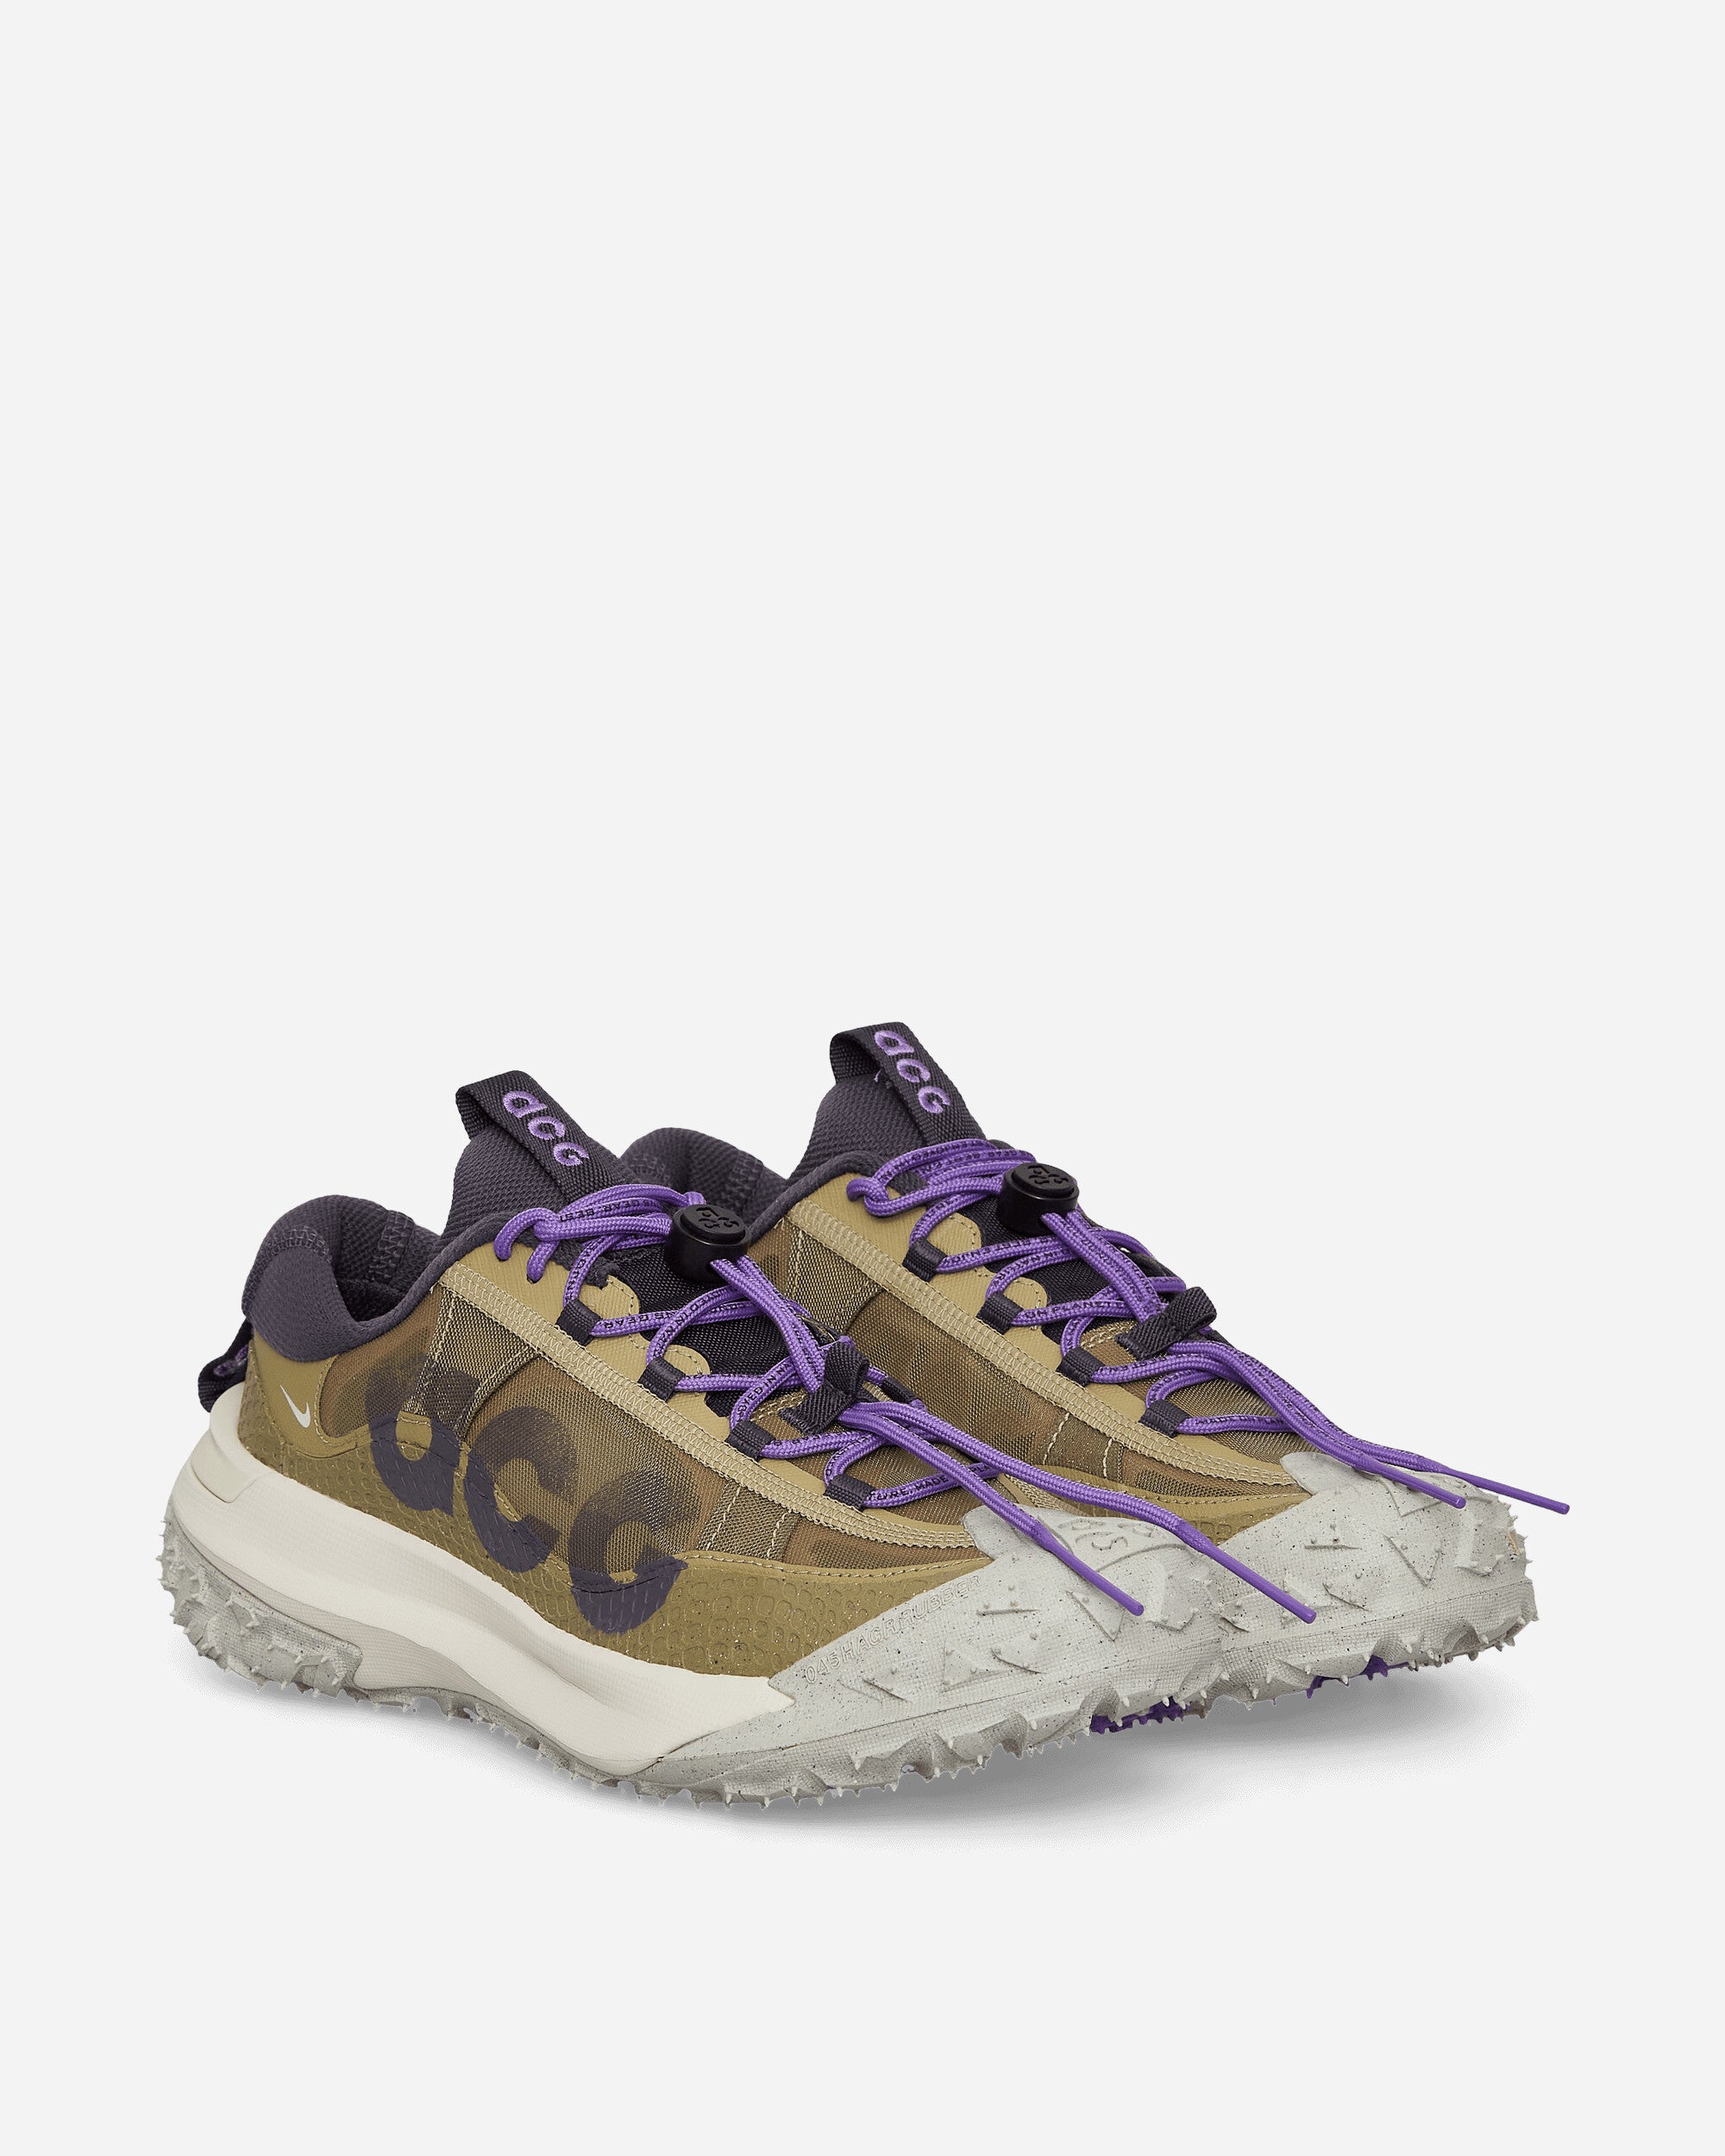 Nike ACG Mountain Fly 2 Low Sneakers Olive - Slam Jam Official Store